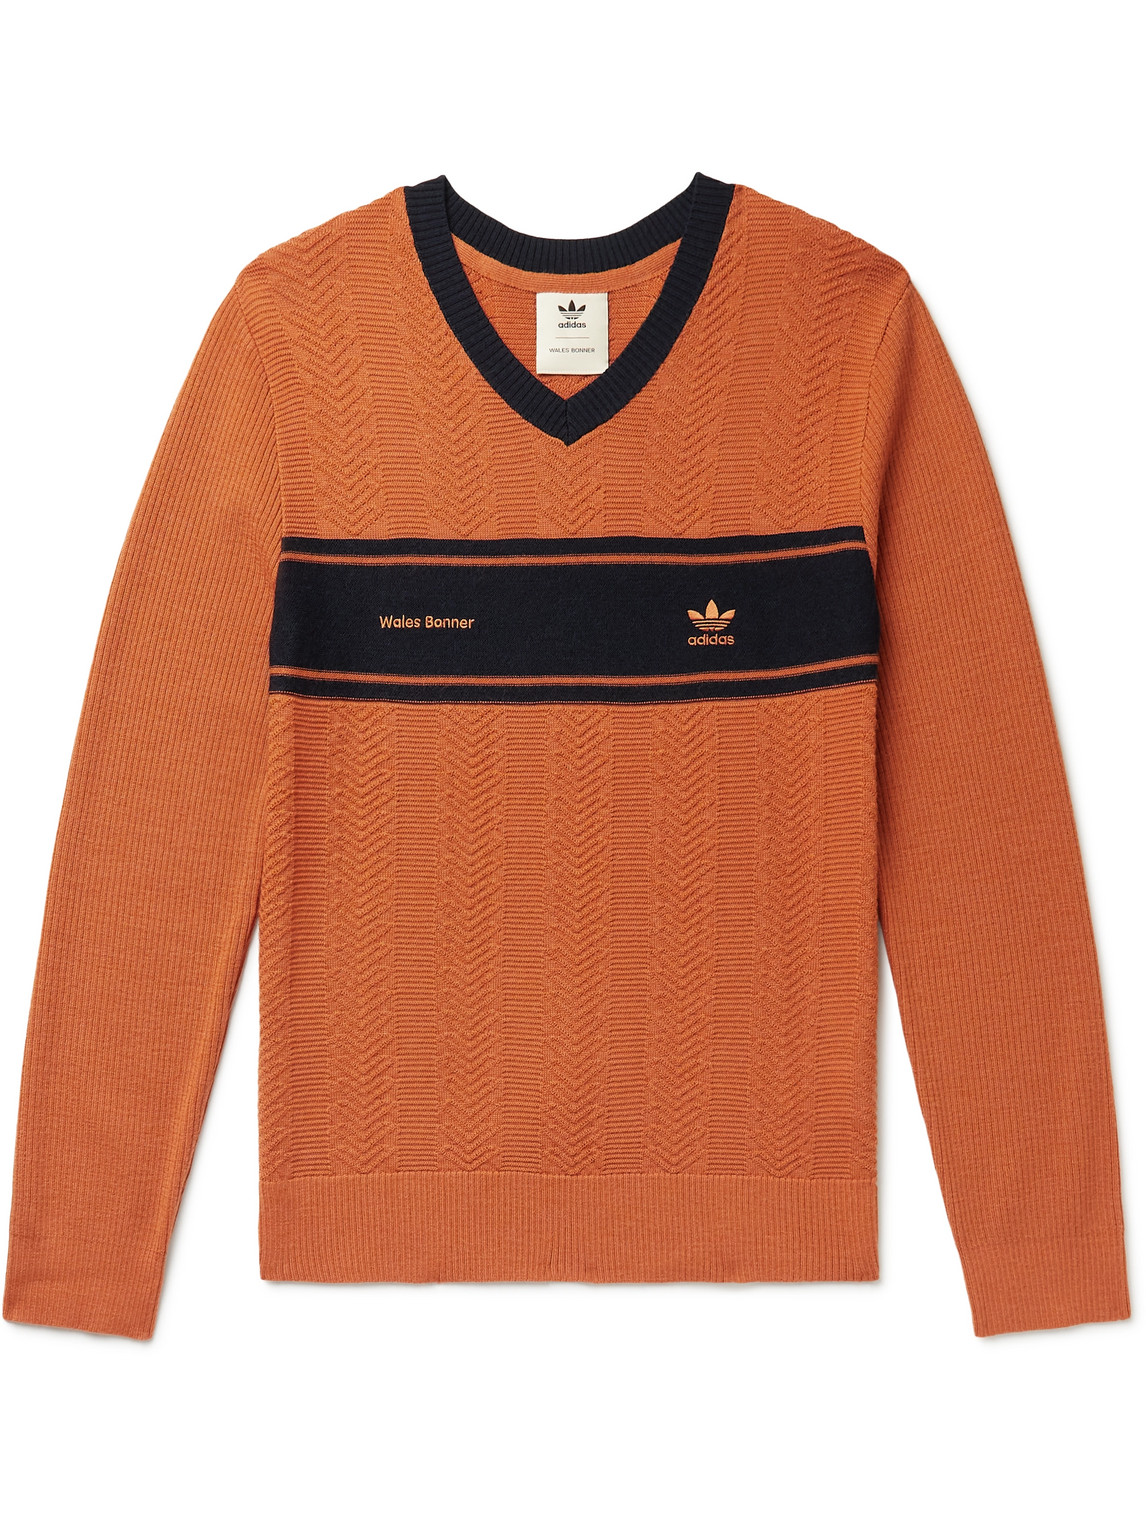 Adidas Consortium Wales Bonner Striped Embroidered Ribbed Wool-blend Sweater In Orange